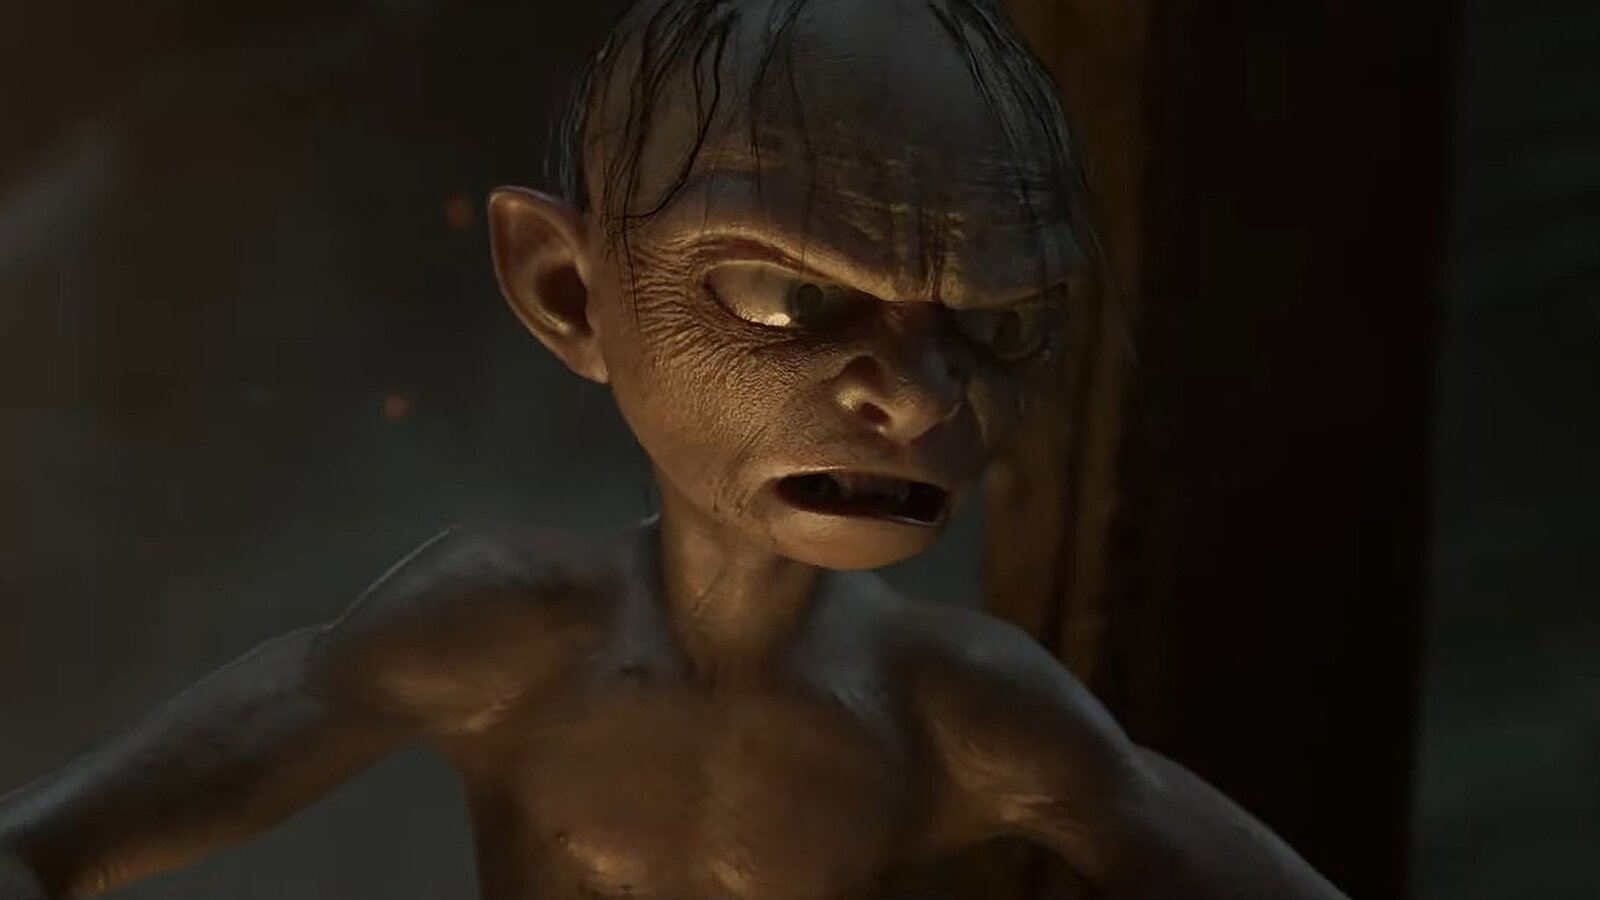 The Lord of the Rings: Gollum - Emotes Pack